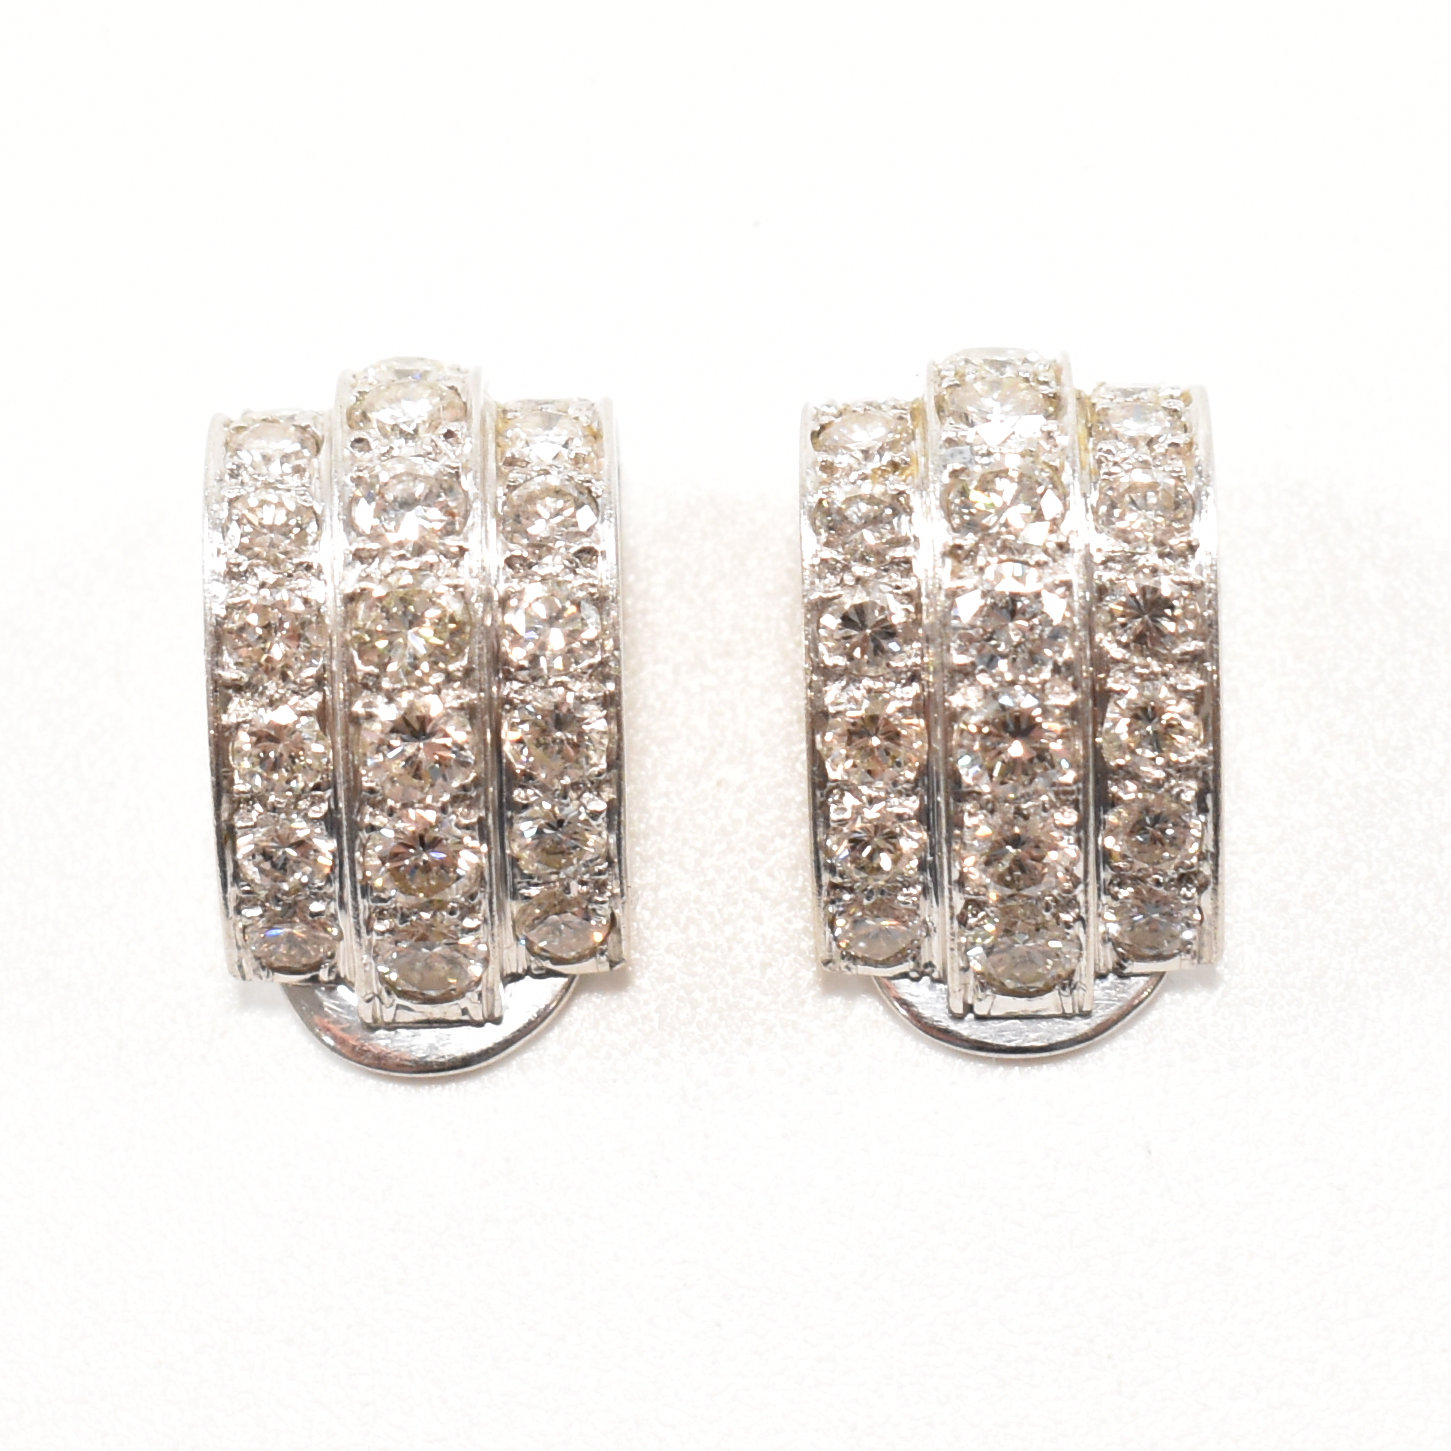 PAIR OF ART DECO 18CT WHITE GOLD & DIAMONDS EAR CLIPS - Image 3 of 8